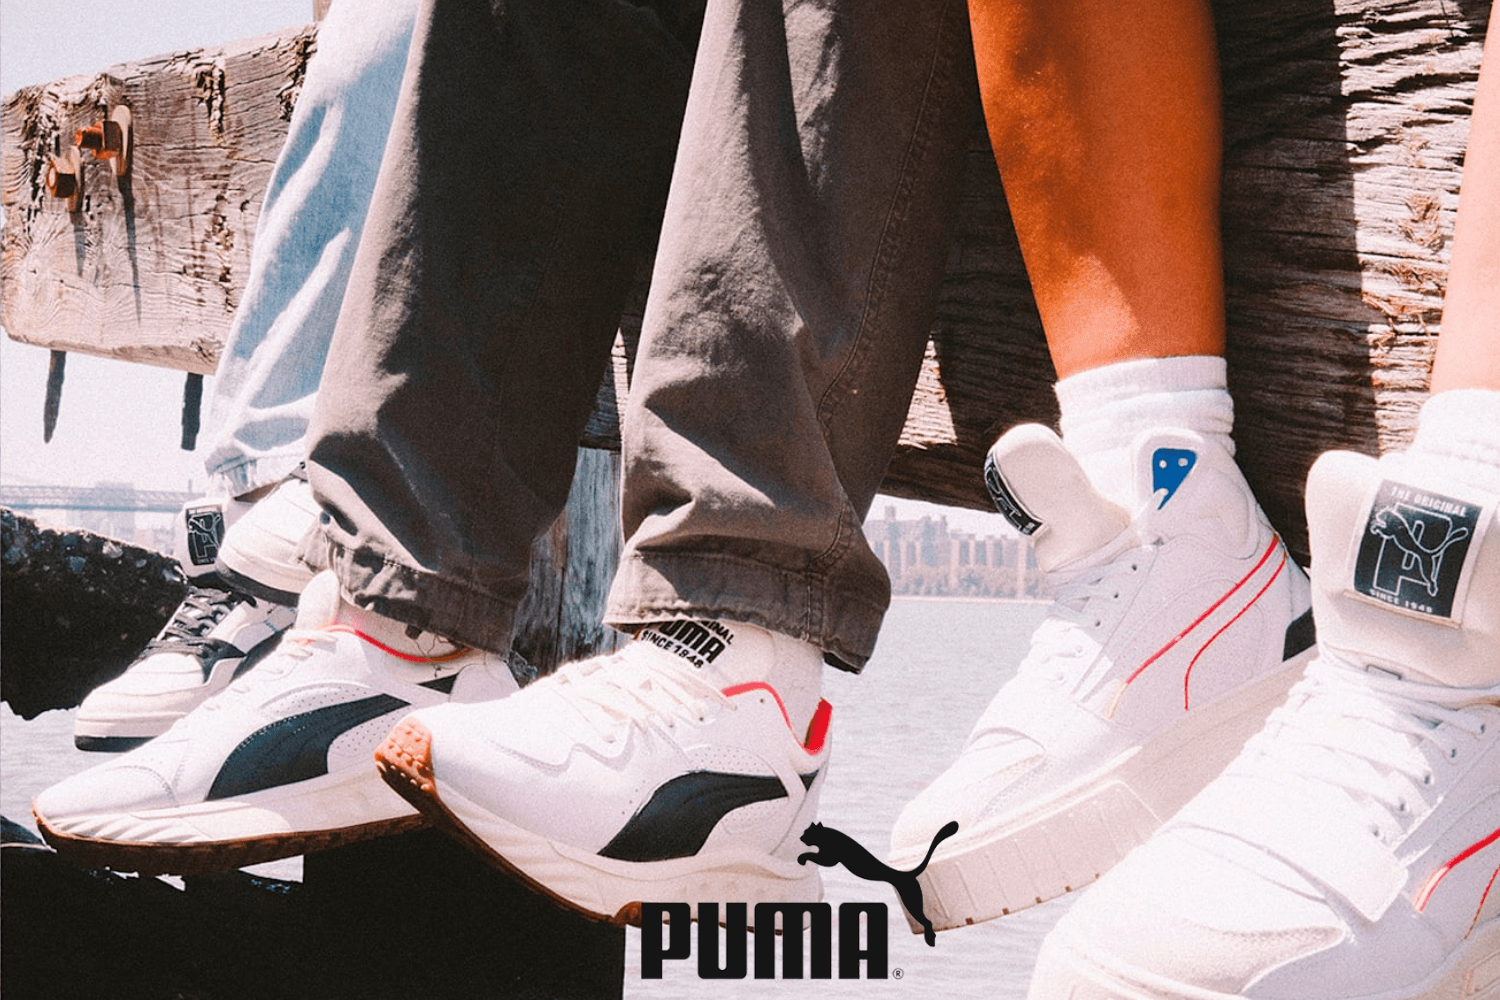 PUMA 'Beat The Clock' comes with discount code